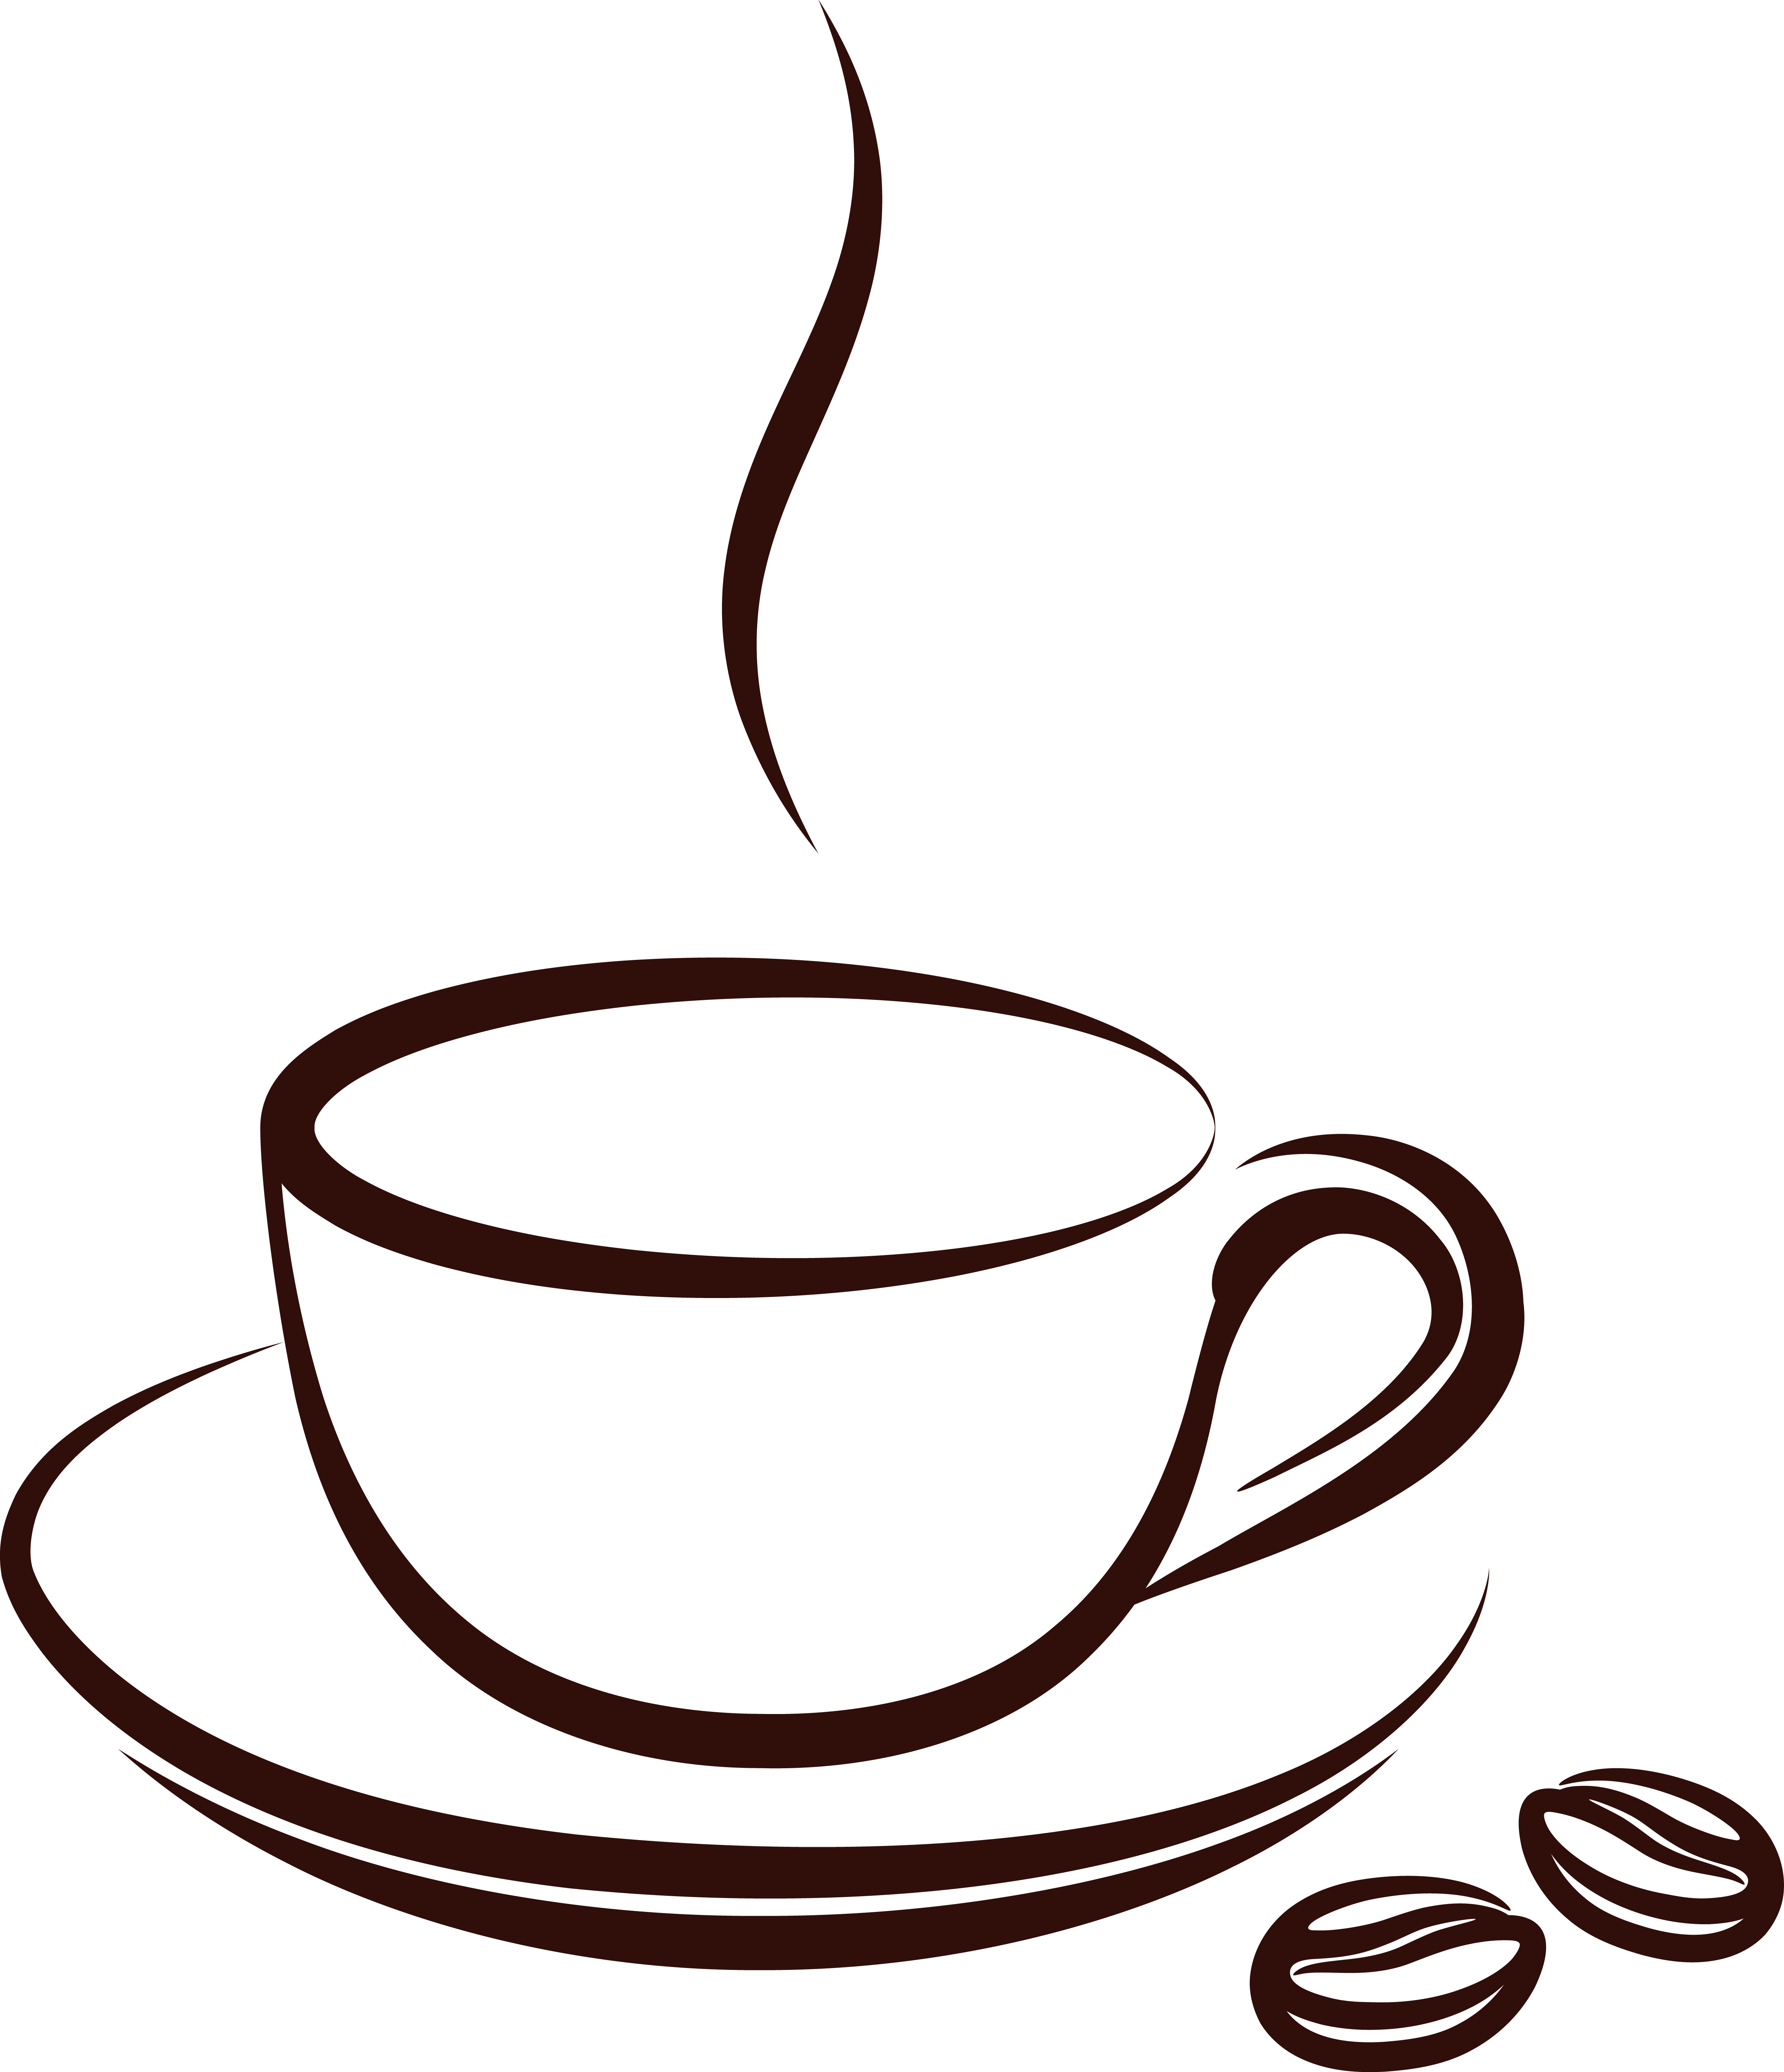 Free Coffee Steam Cliparts, Download Free Clip Art, Free.